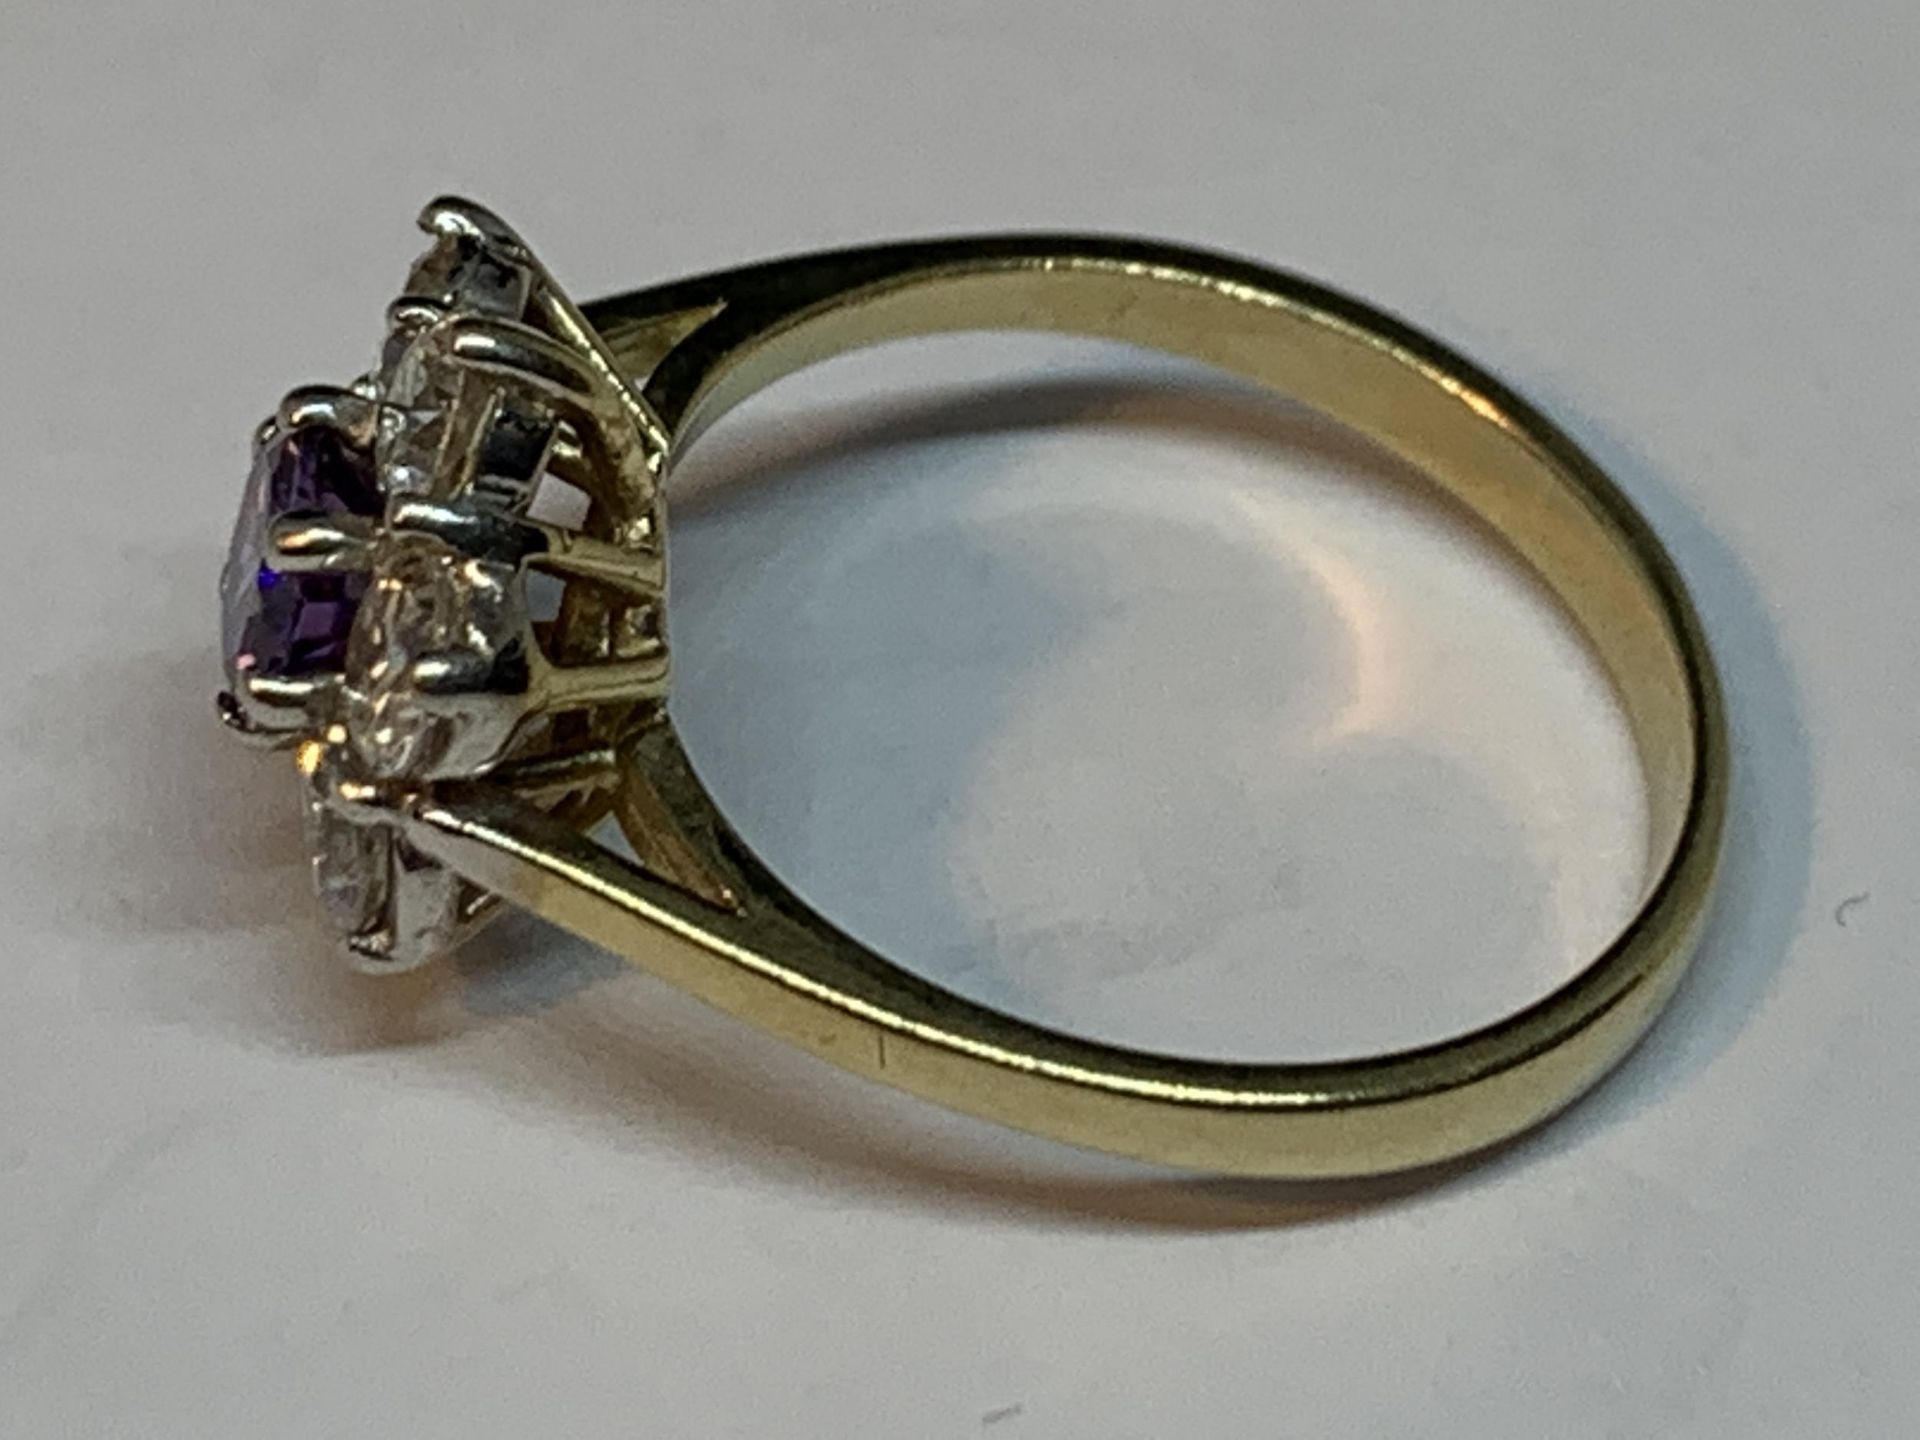 A 9 CARAT GOLD RING WITH CENTRE AMETHYST SURROUNDED BY CUBIC ZIRCONIAS IN A FLOWER DESIGN SIZE P/Q - Image 2 of 3